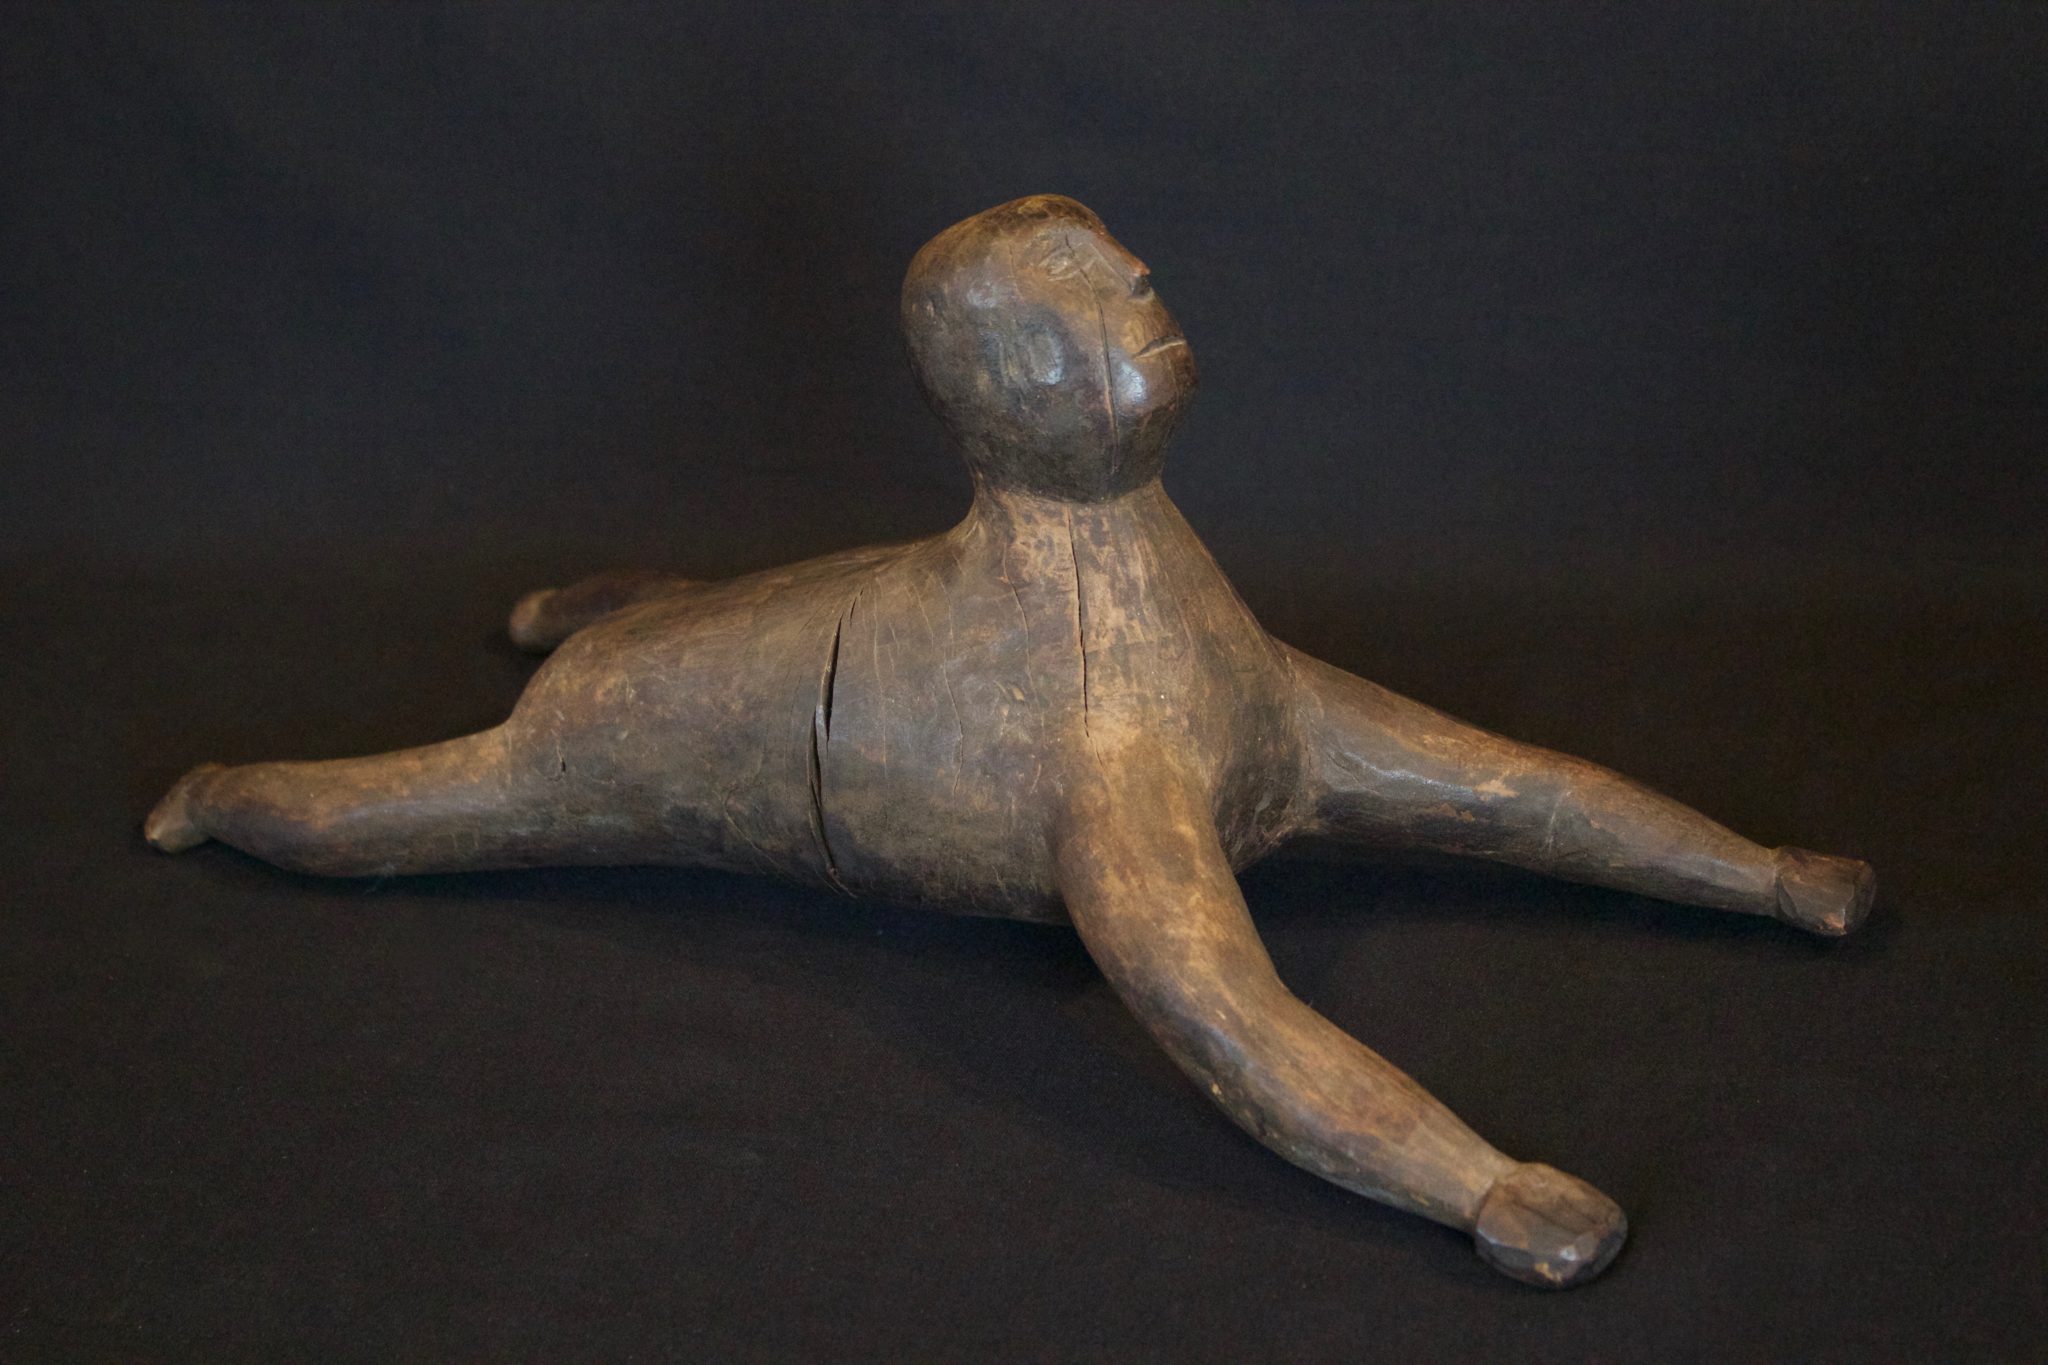 Hunting Spirit Guide, West Sumba Island, Lesser Sunda Islands, Indonesia, Kodi village. Early to mid 20th c. Wood, patinated with use and age. Spirit guide figure to pray to before hunting or fishing. 7” x 6 ½” x 16”, $325.